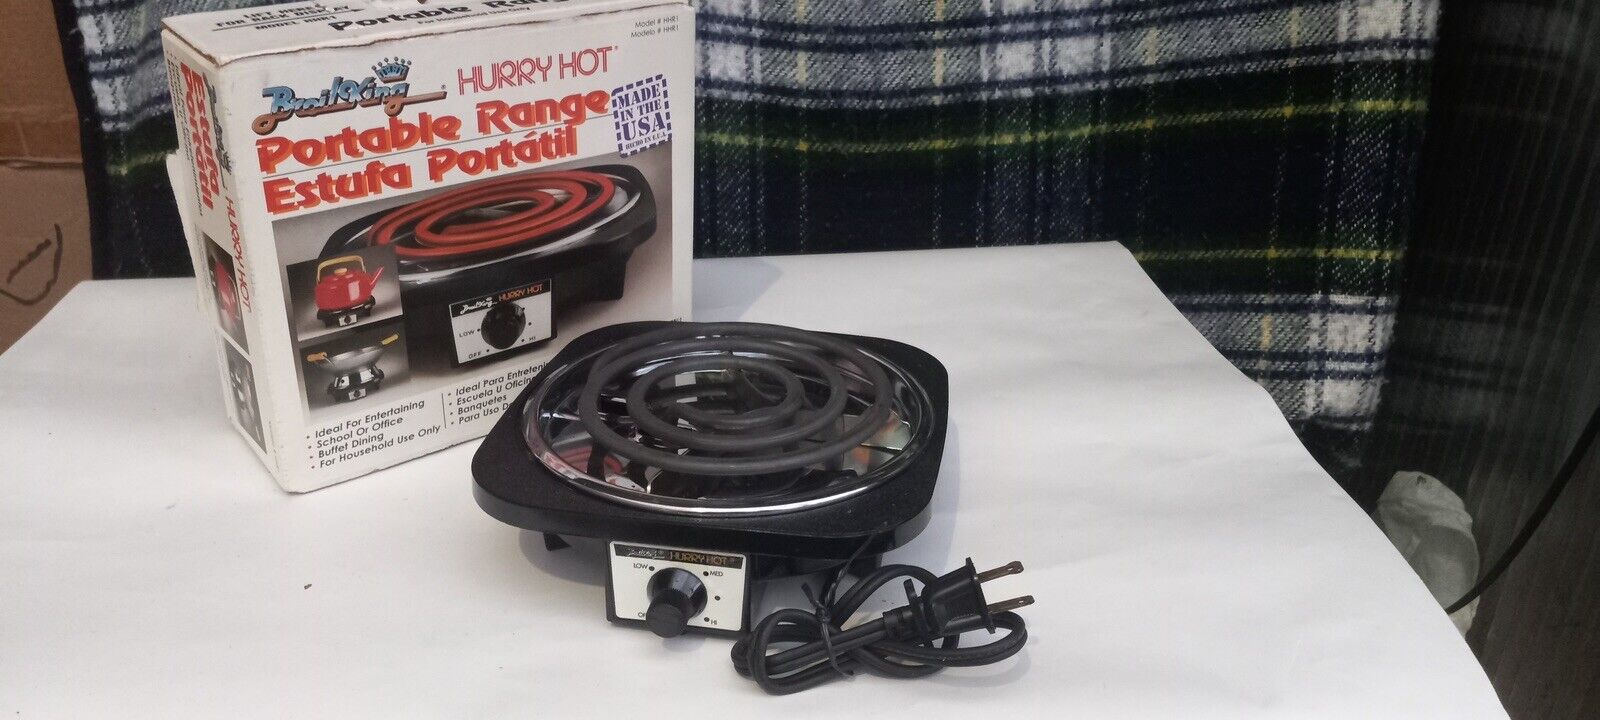 VINTAGE “BROIL KING “  HURRY HOT  PORTABLE RANGE . ( New In Open Box).